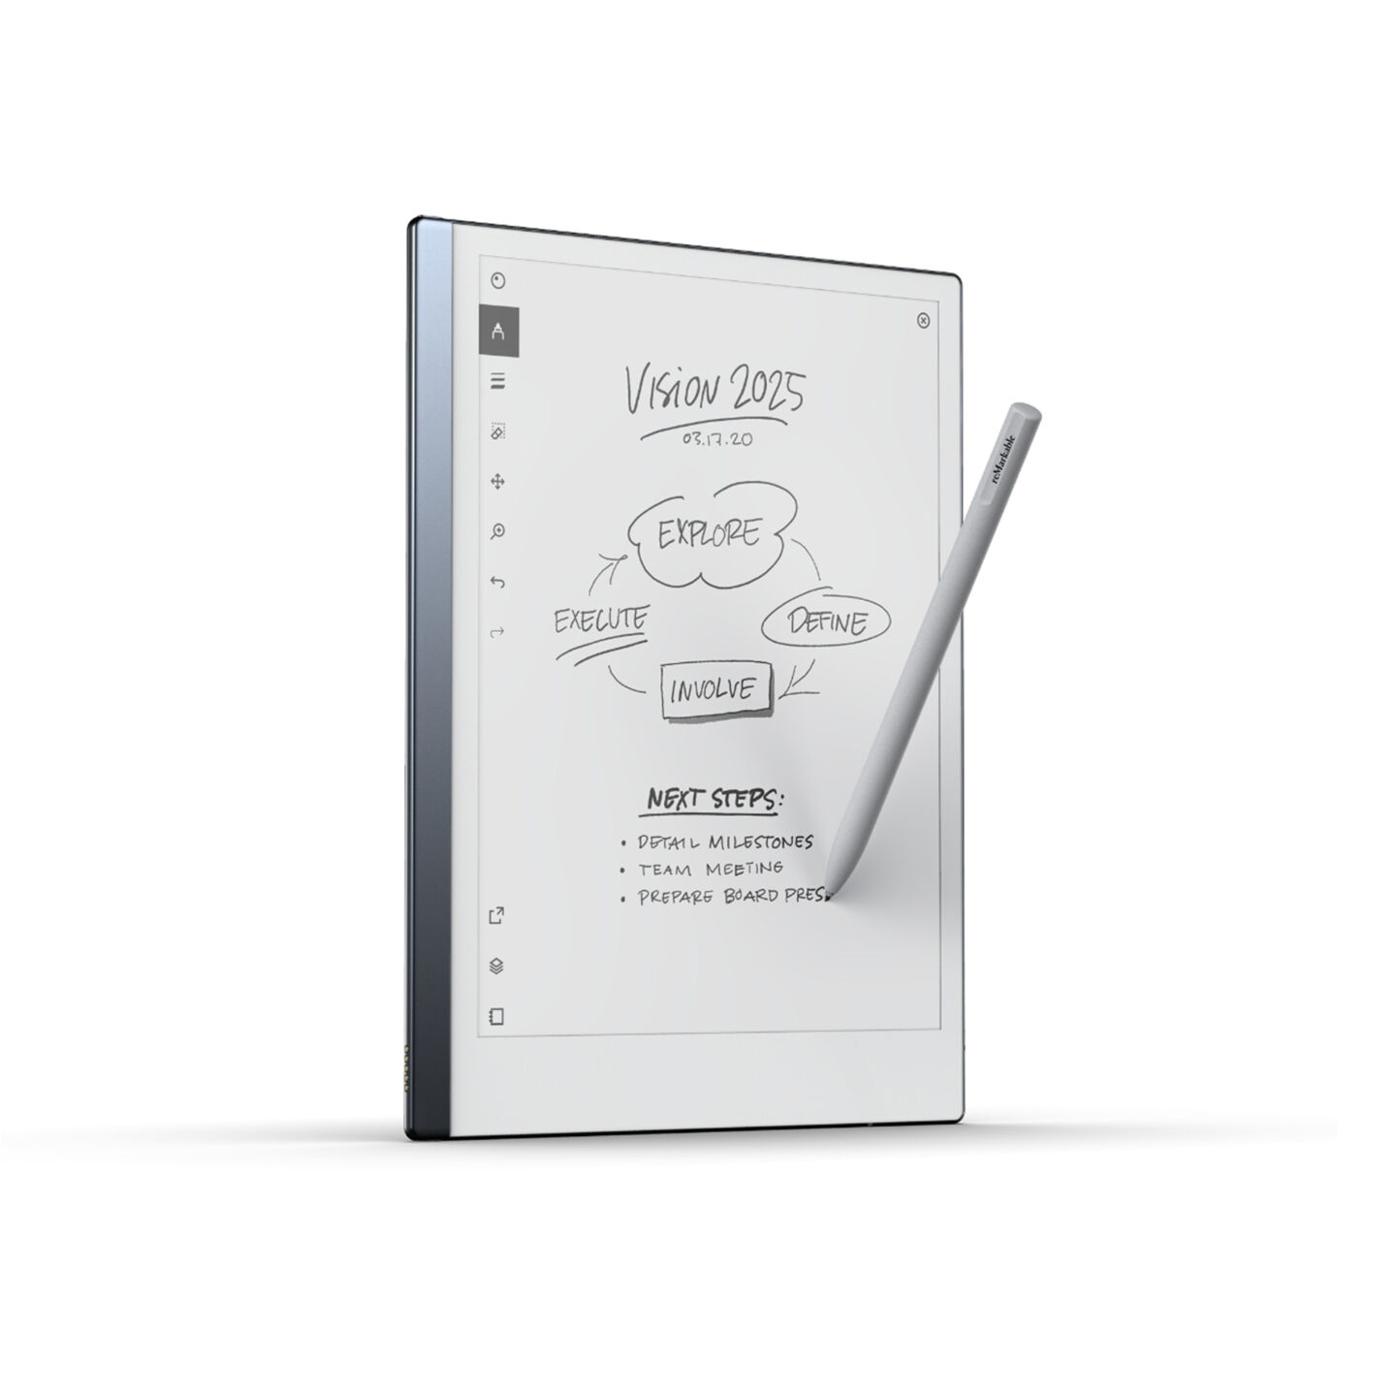 Time to rip up the notepad? reMarkable's tablet aims to mimic real